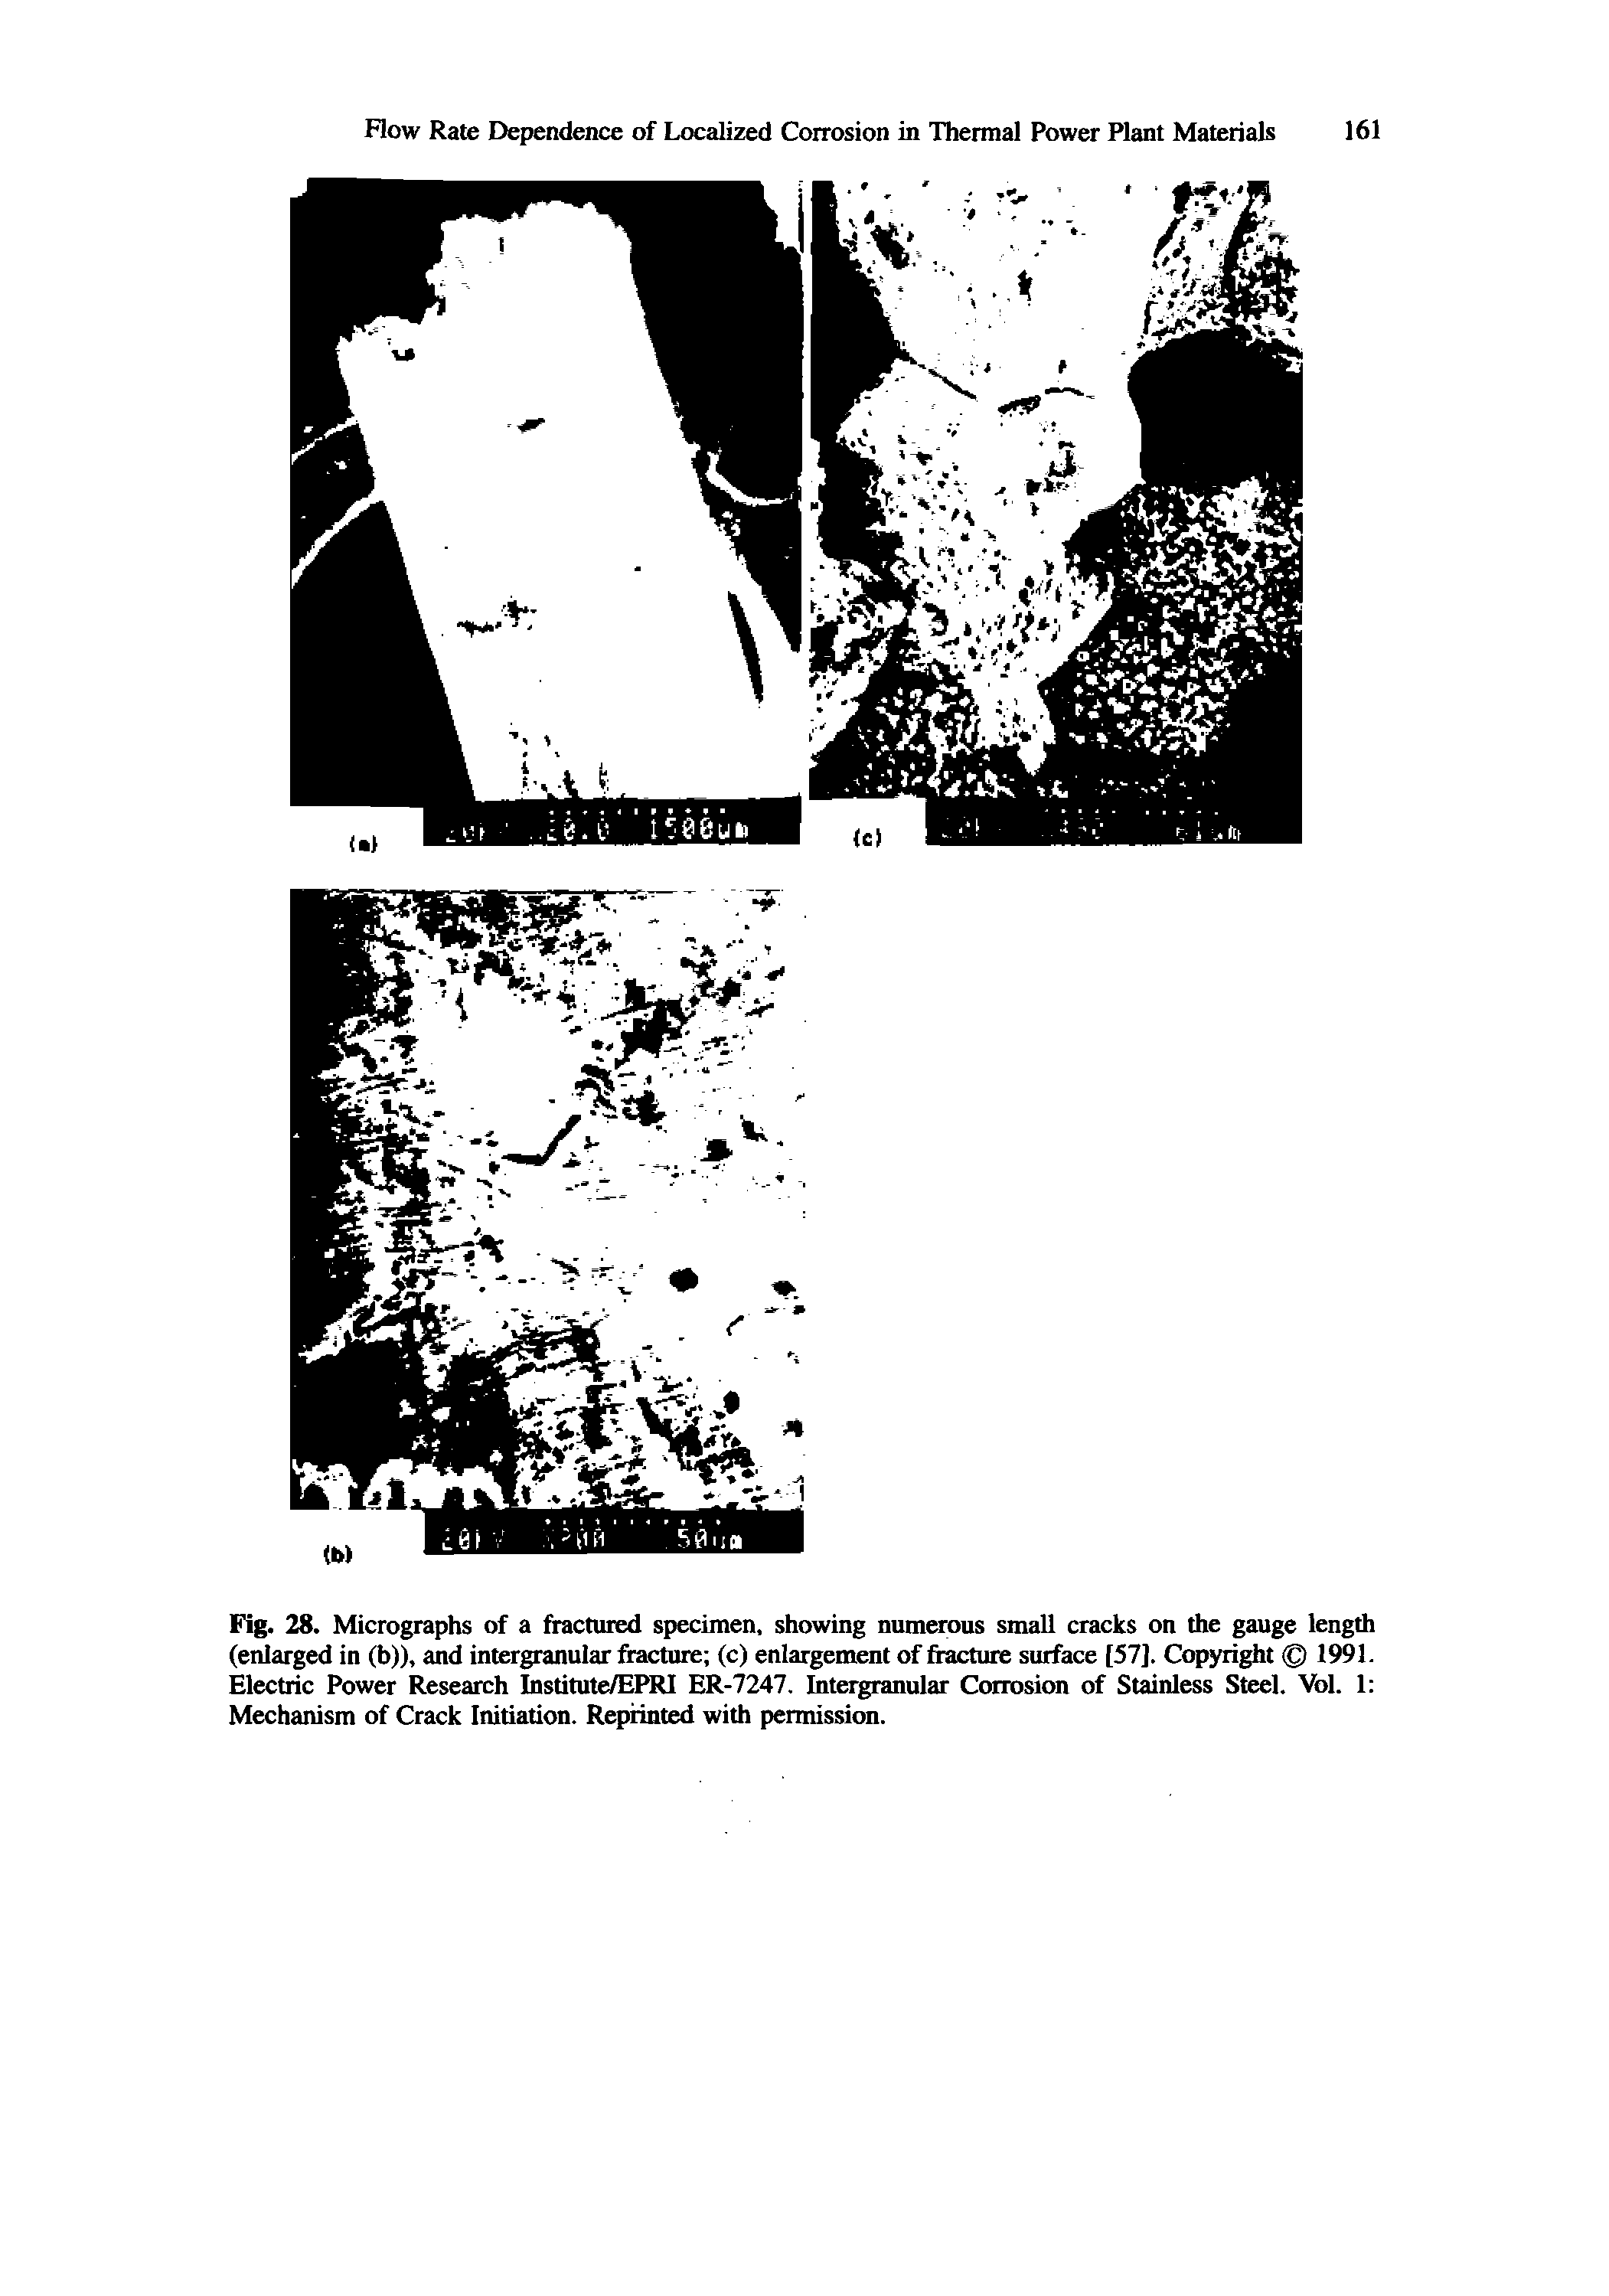 Fig. 28. Micrographs of a fractured specimen, showing numerous small cracks on the gauge length (enlarged in (b)), and intergranular fracture (c) enlargement of fracture surface [57]. Copyright 1991. Electric Power Research Institute/EPRl ER-7247. Intergranular Corrosion of Stainless Steel. Vol. 1 Mechanism of Crack Initiation. Reprinted with permission.